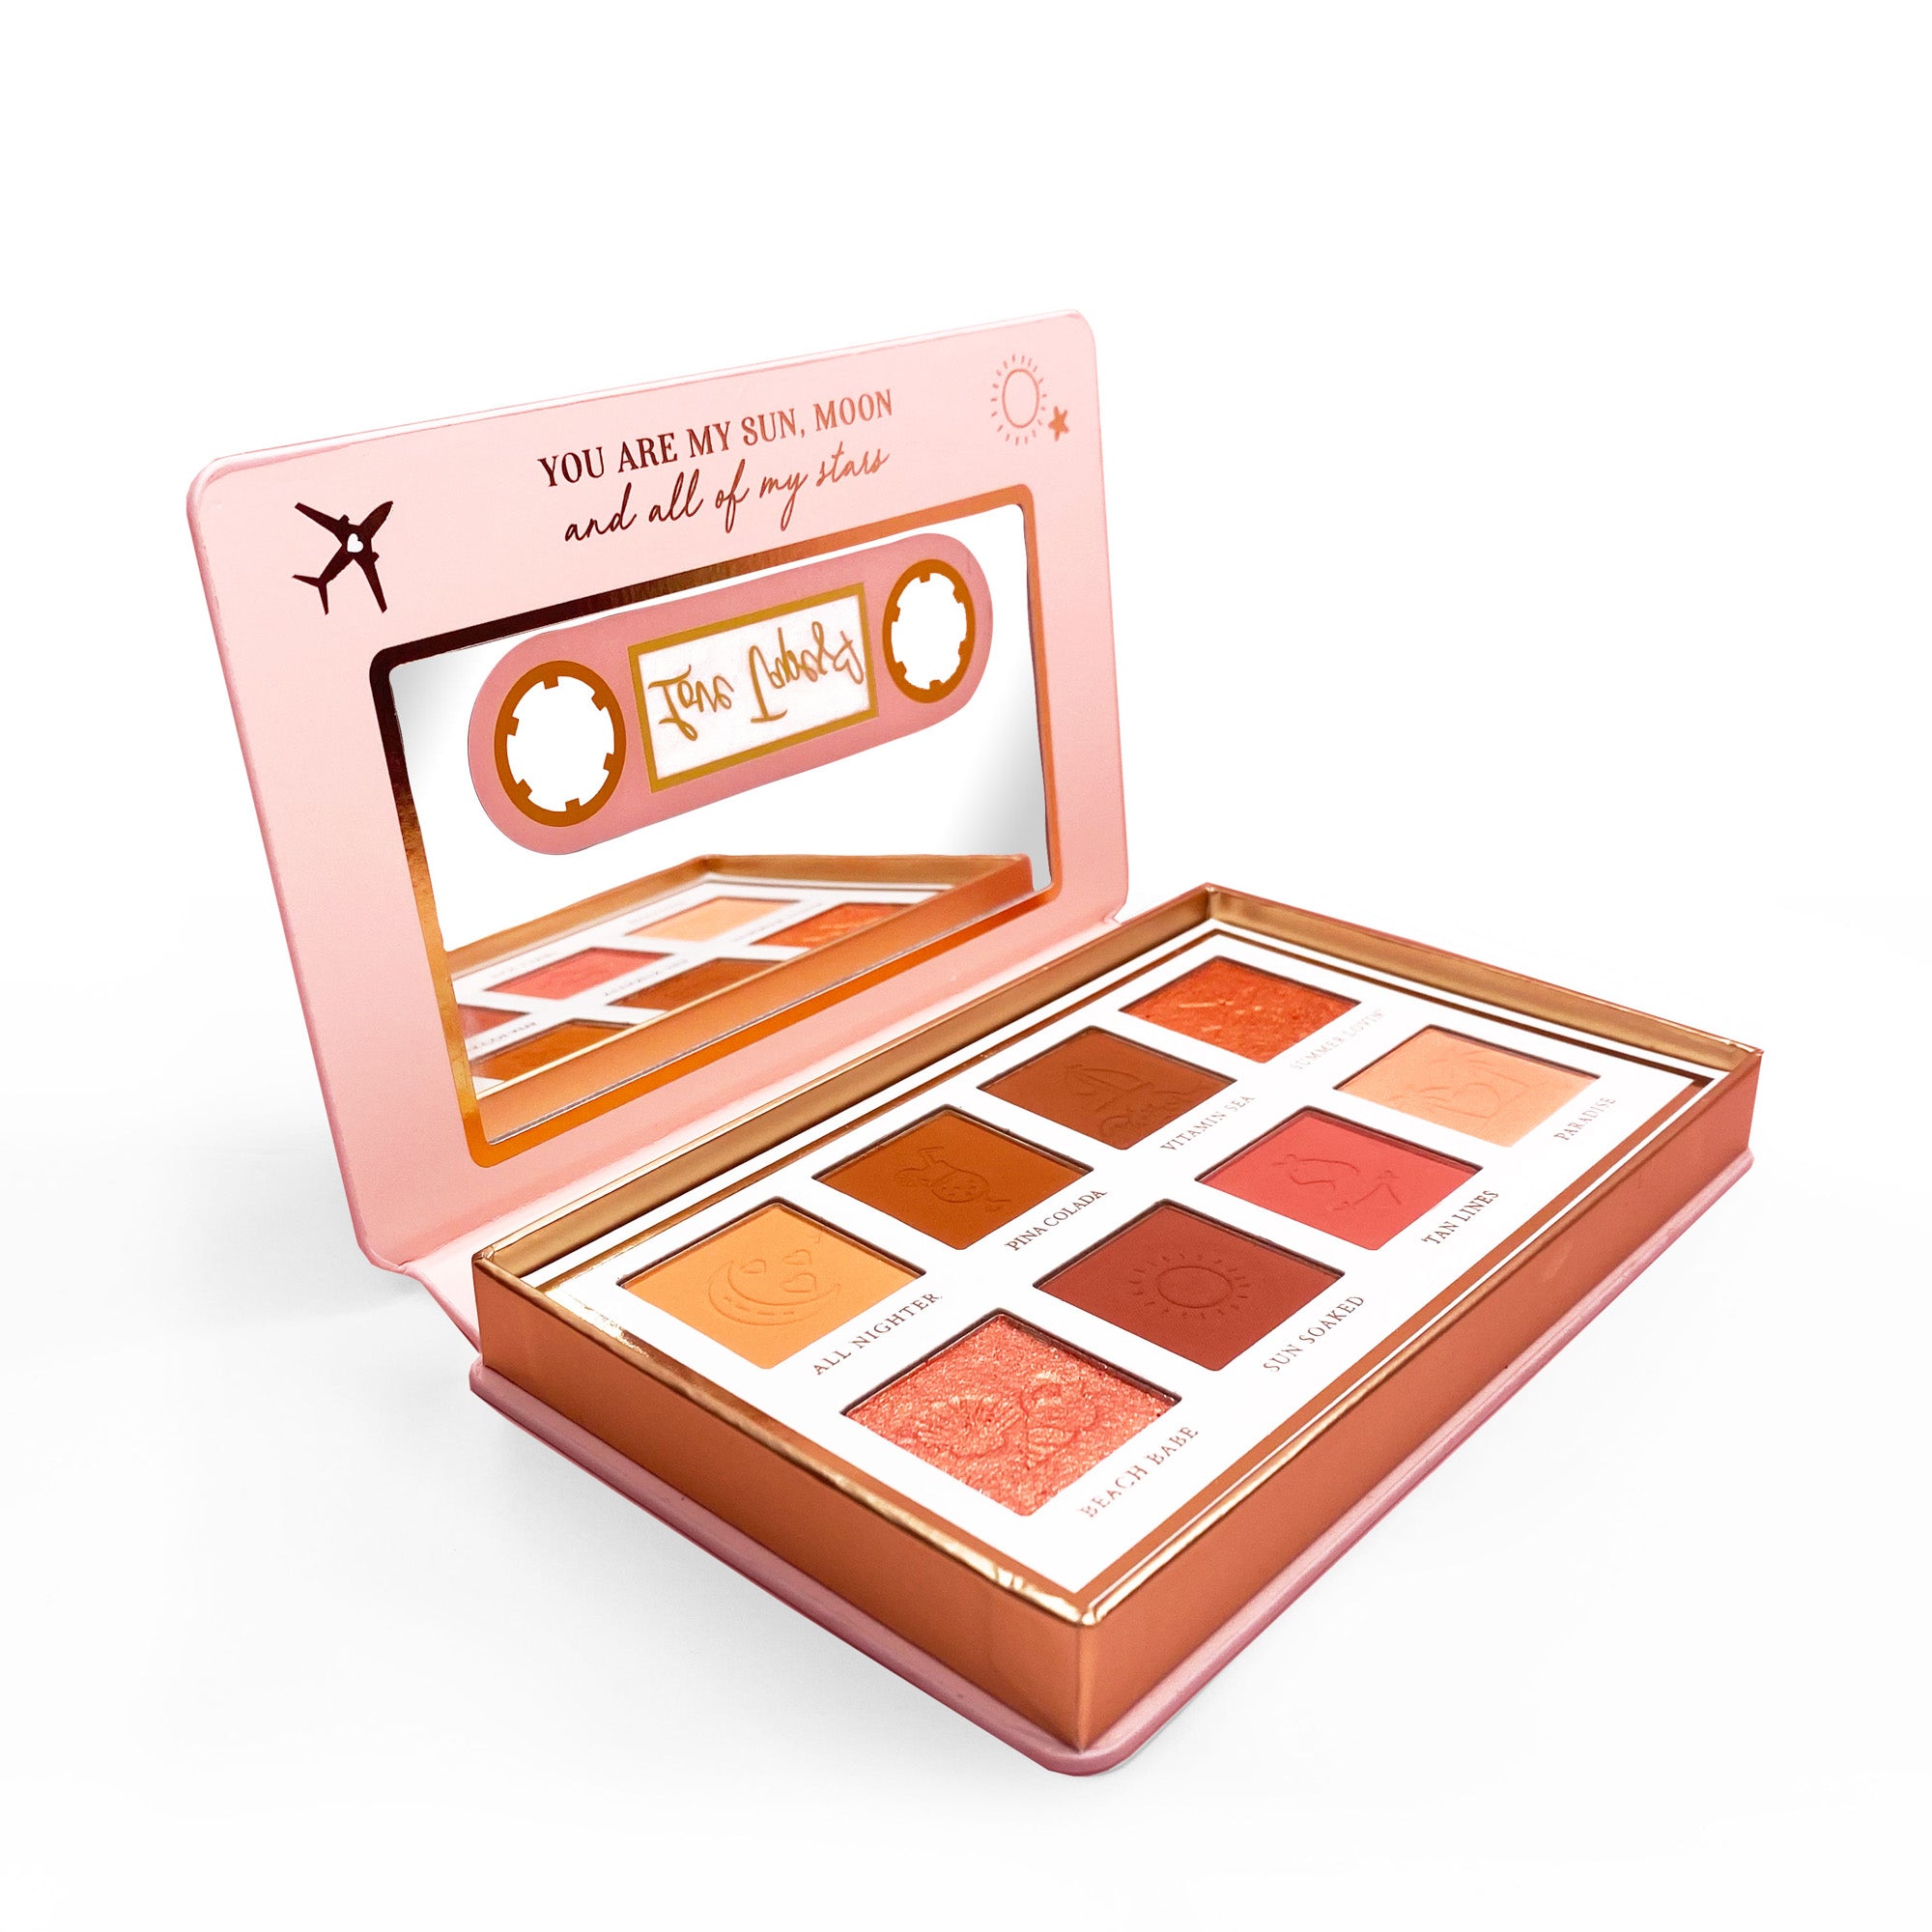 P.Louise - Love Tapes Eyeshadow Palette - Baecation - BPerfect 